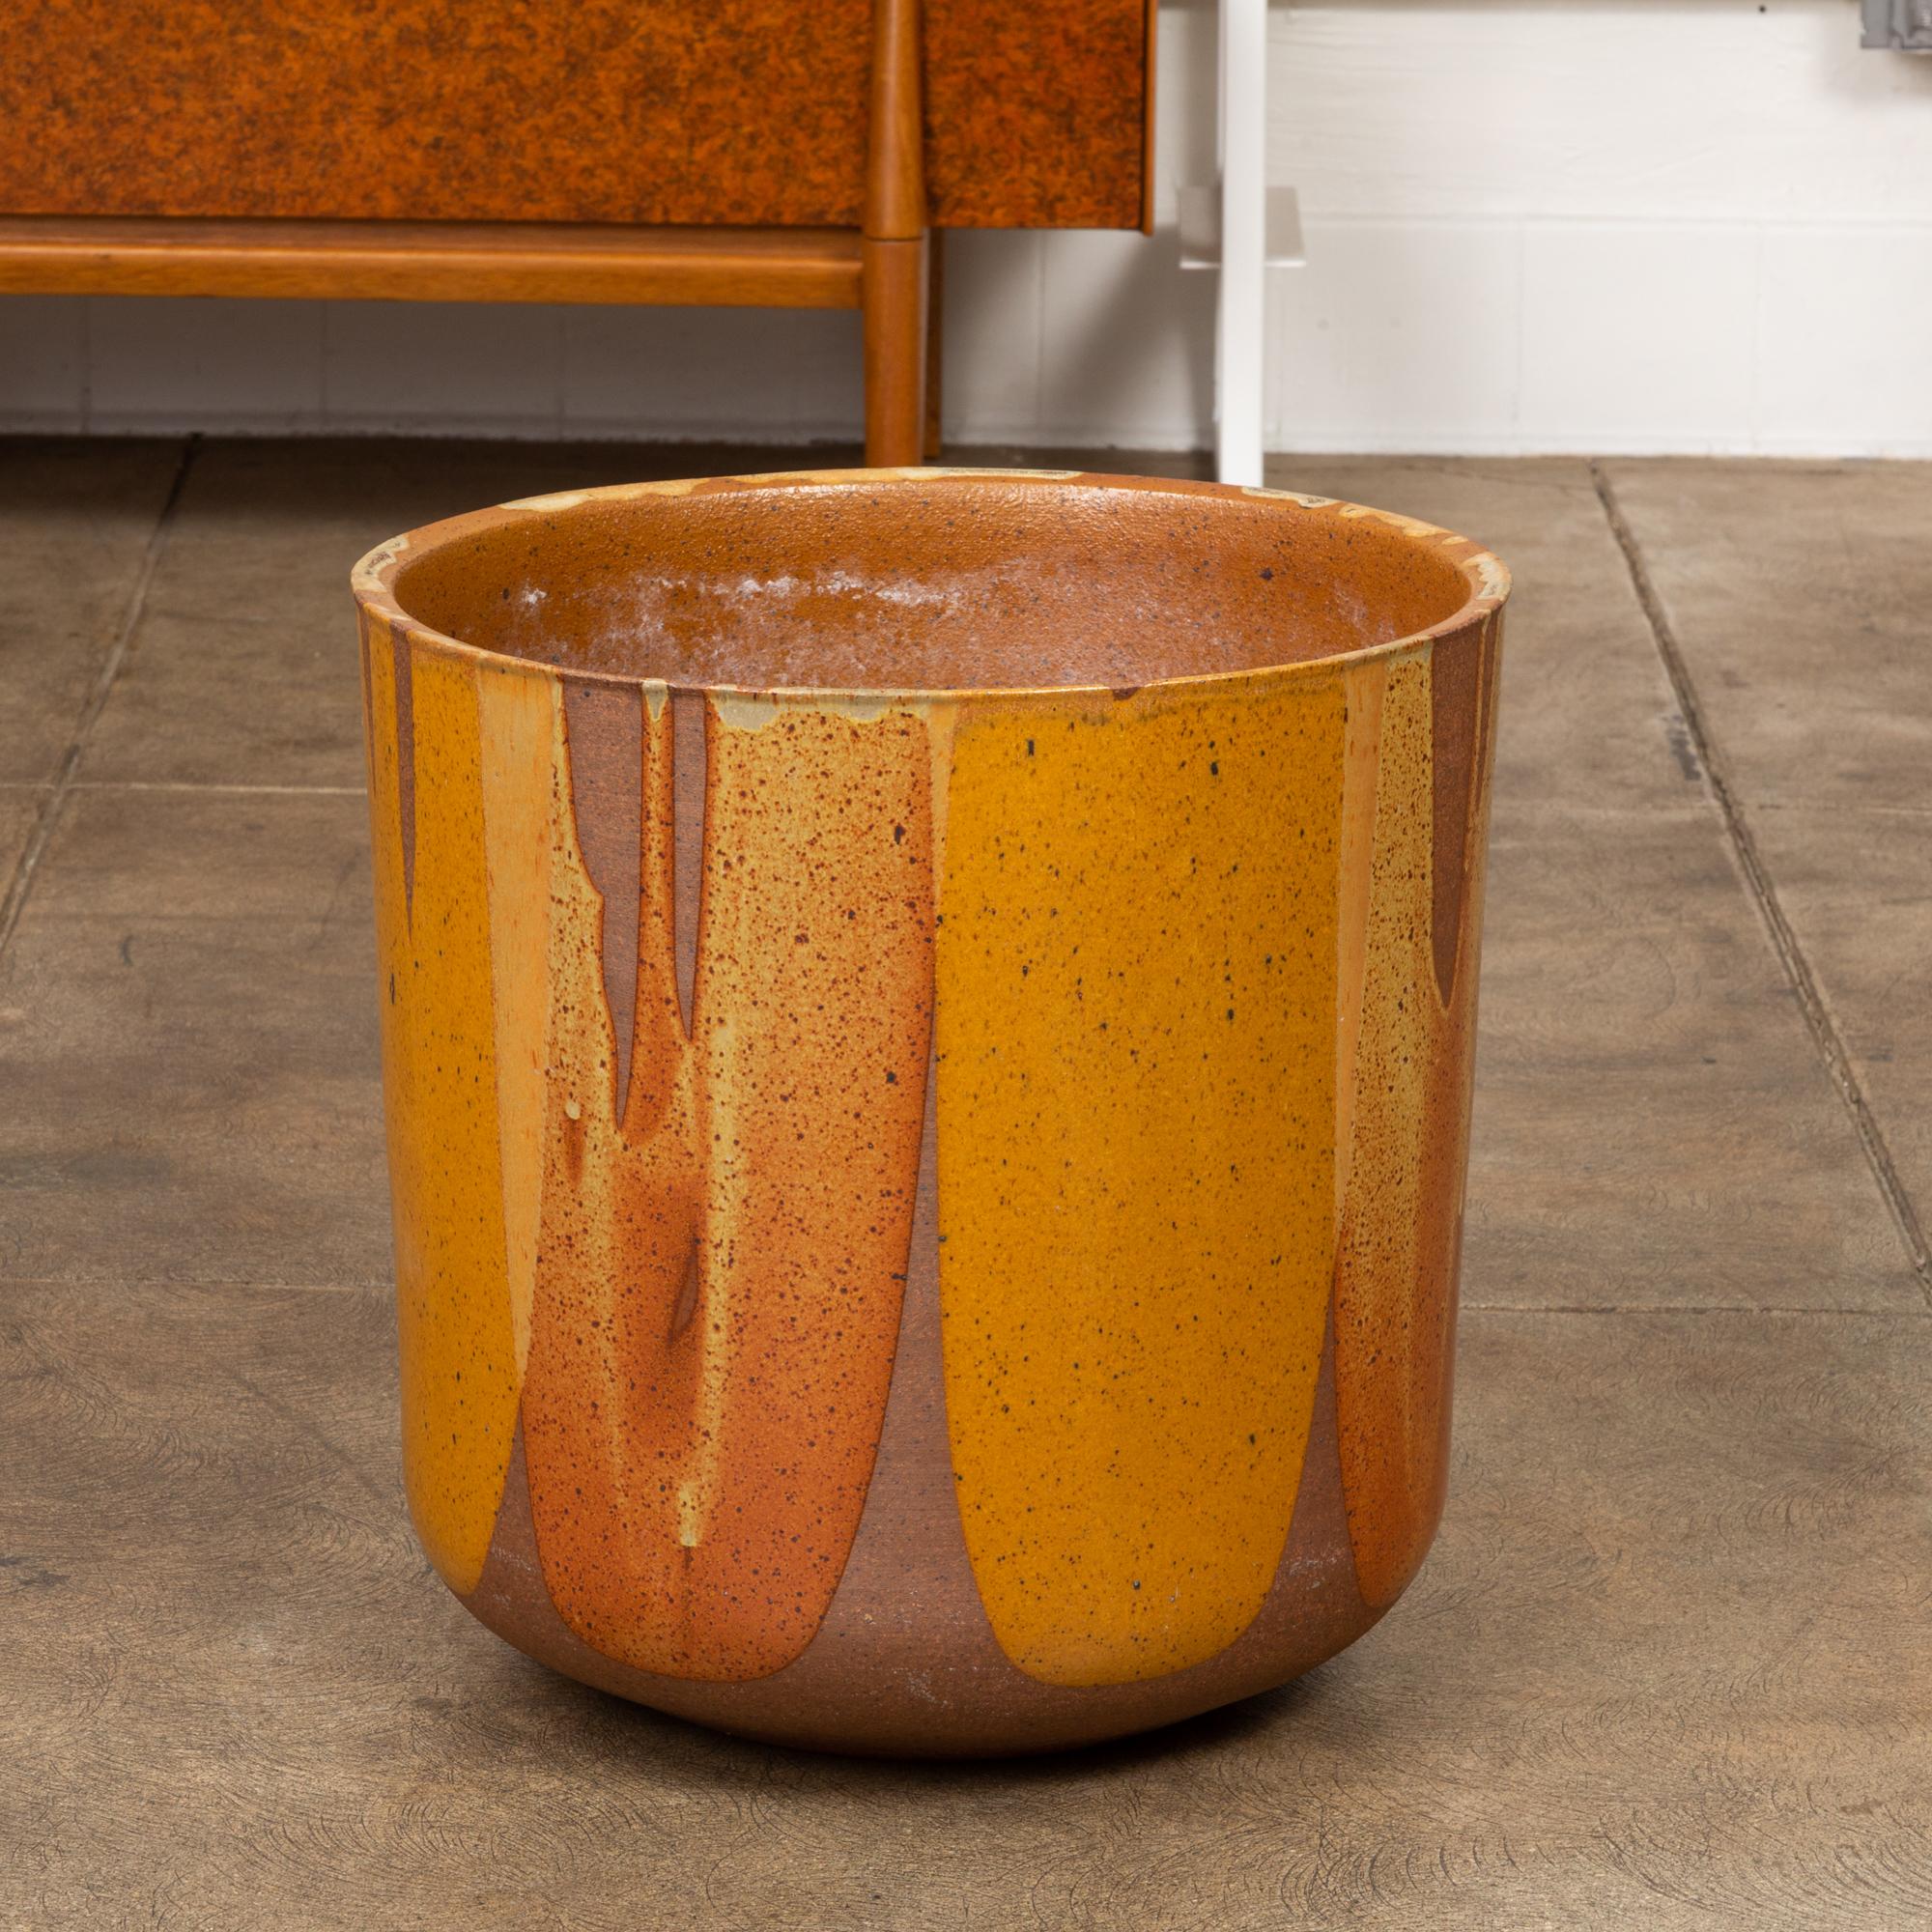 A tulip-shaped LT-24 planter for Architectural Pottery with David Cressey's Pro/Artisan “Flame Glaze.” This planter shape was designed by Malcolm Leland and has a rounded bottom that widens towards the opening, a simple shape rendered dramatic by